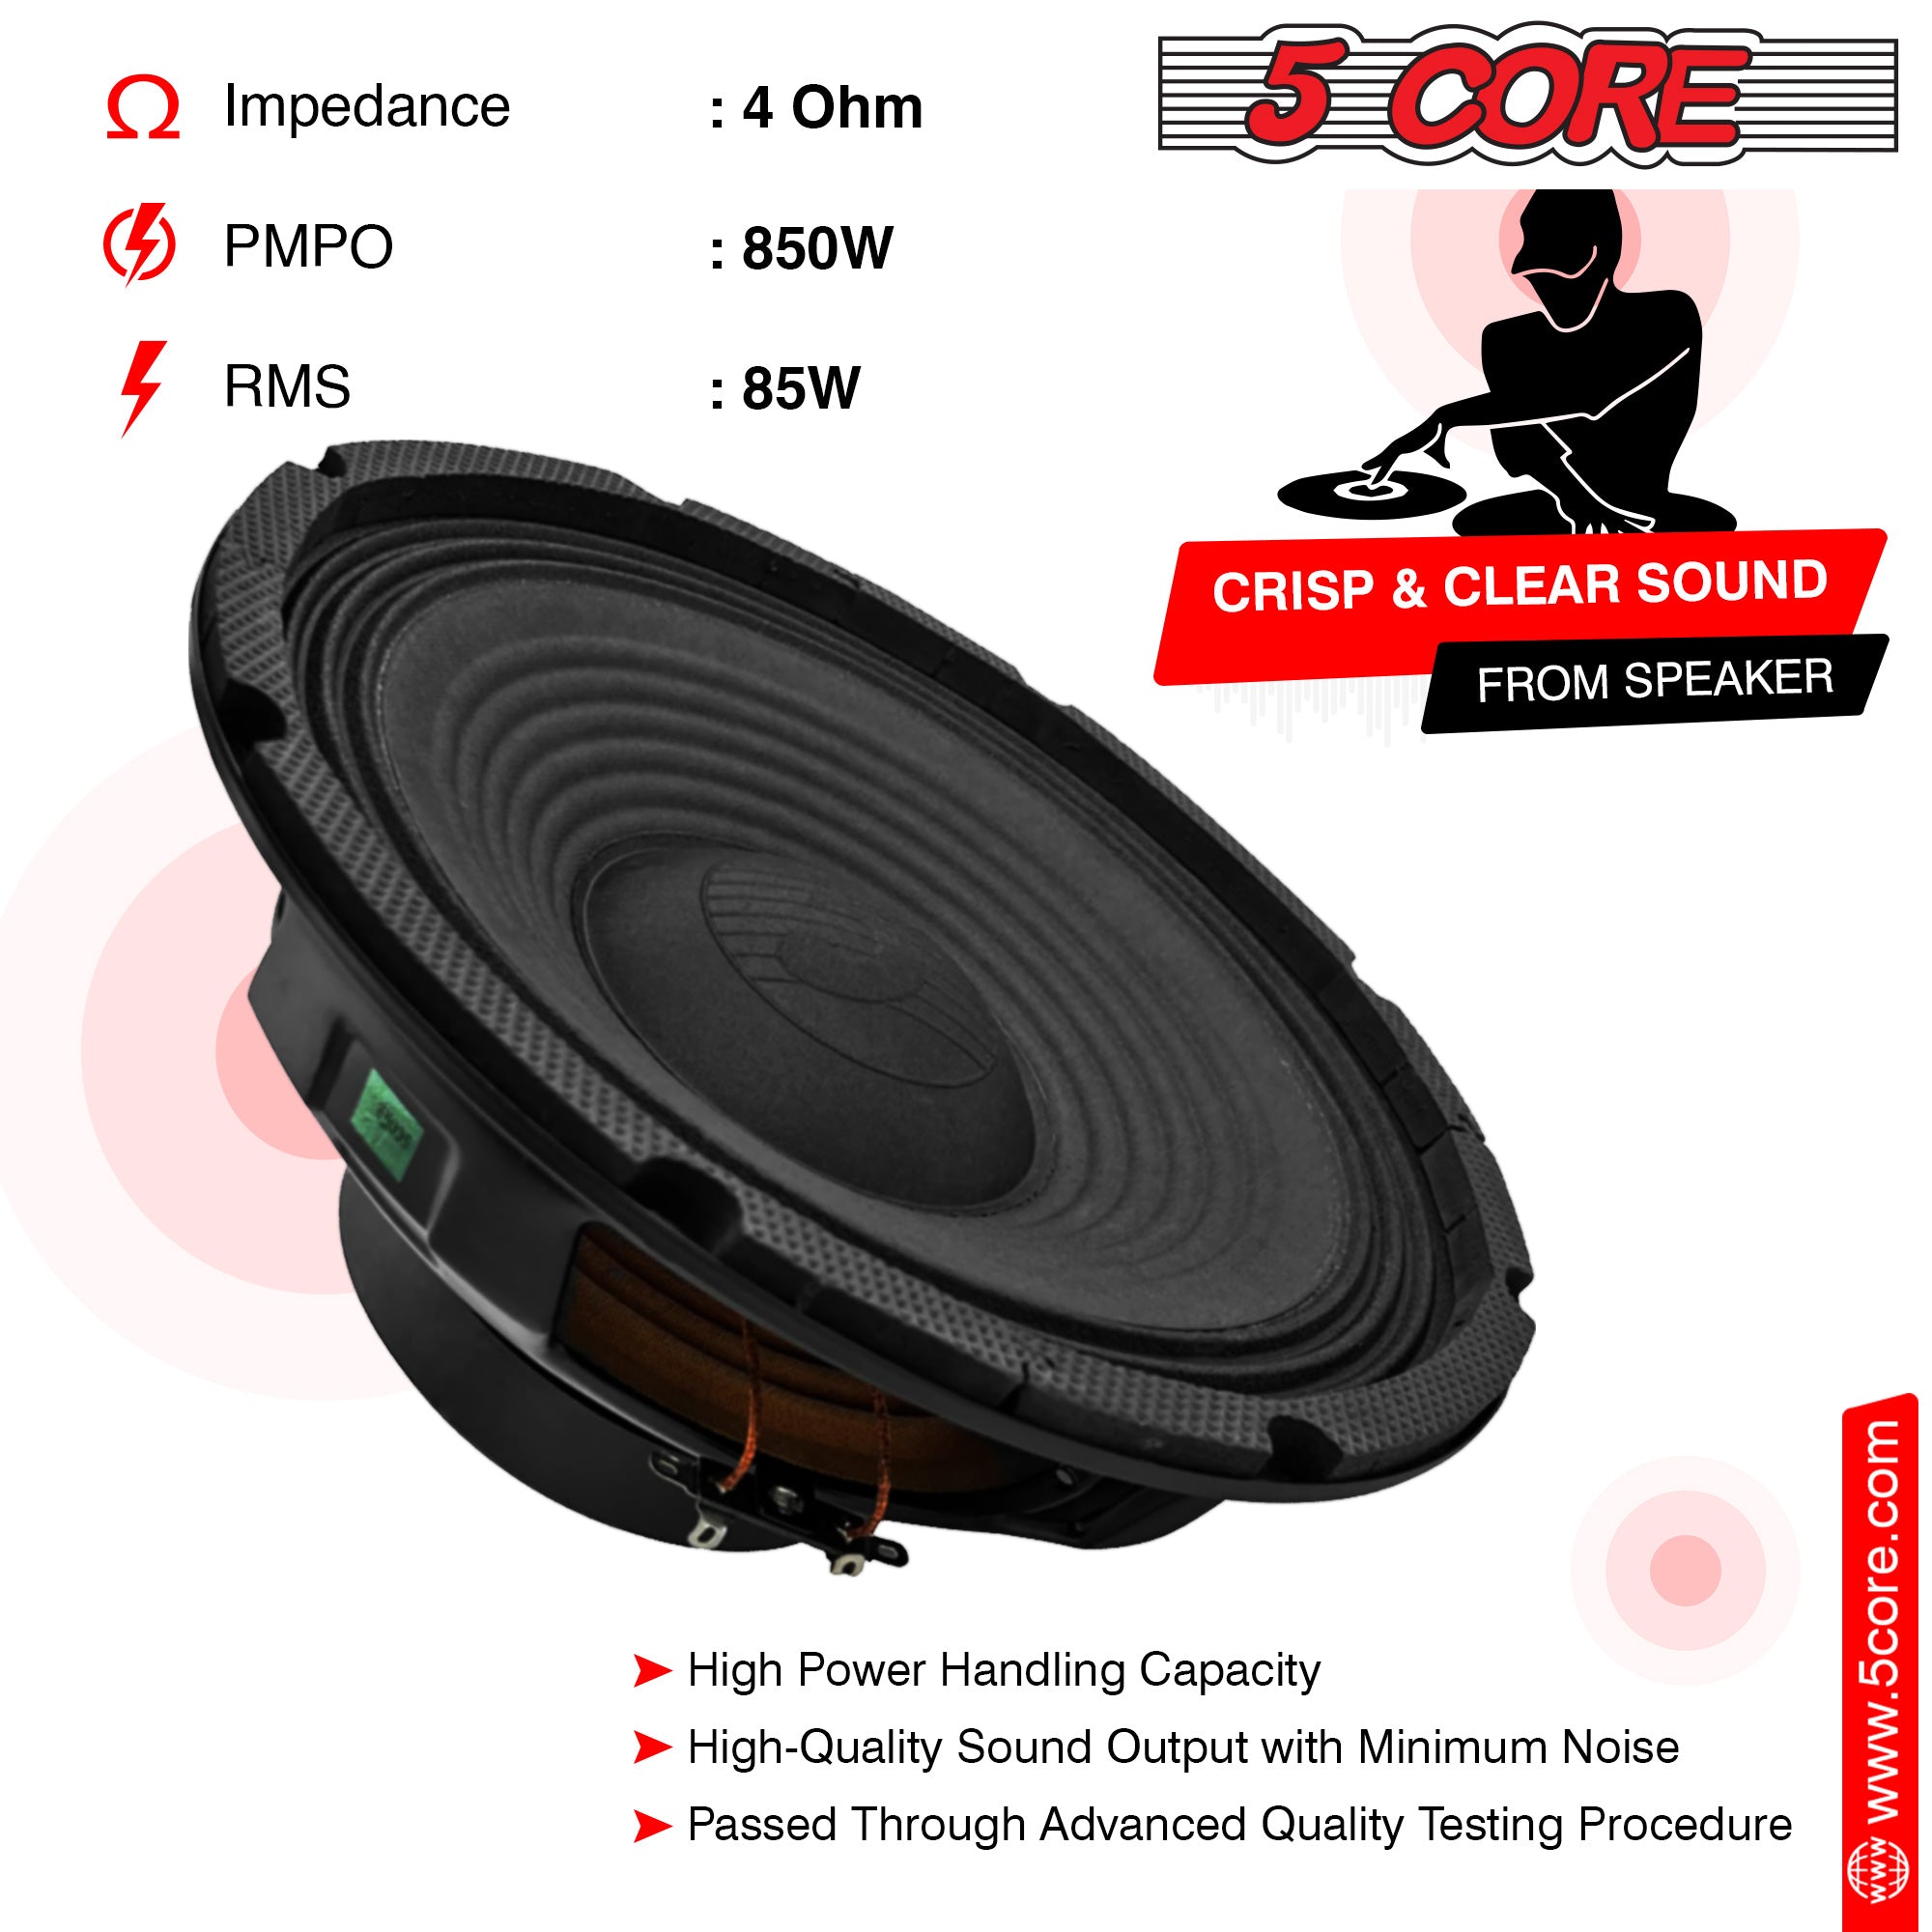 10 inch subwoofer 850w pmpo